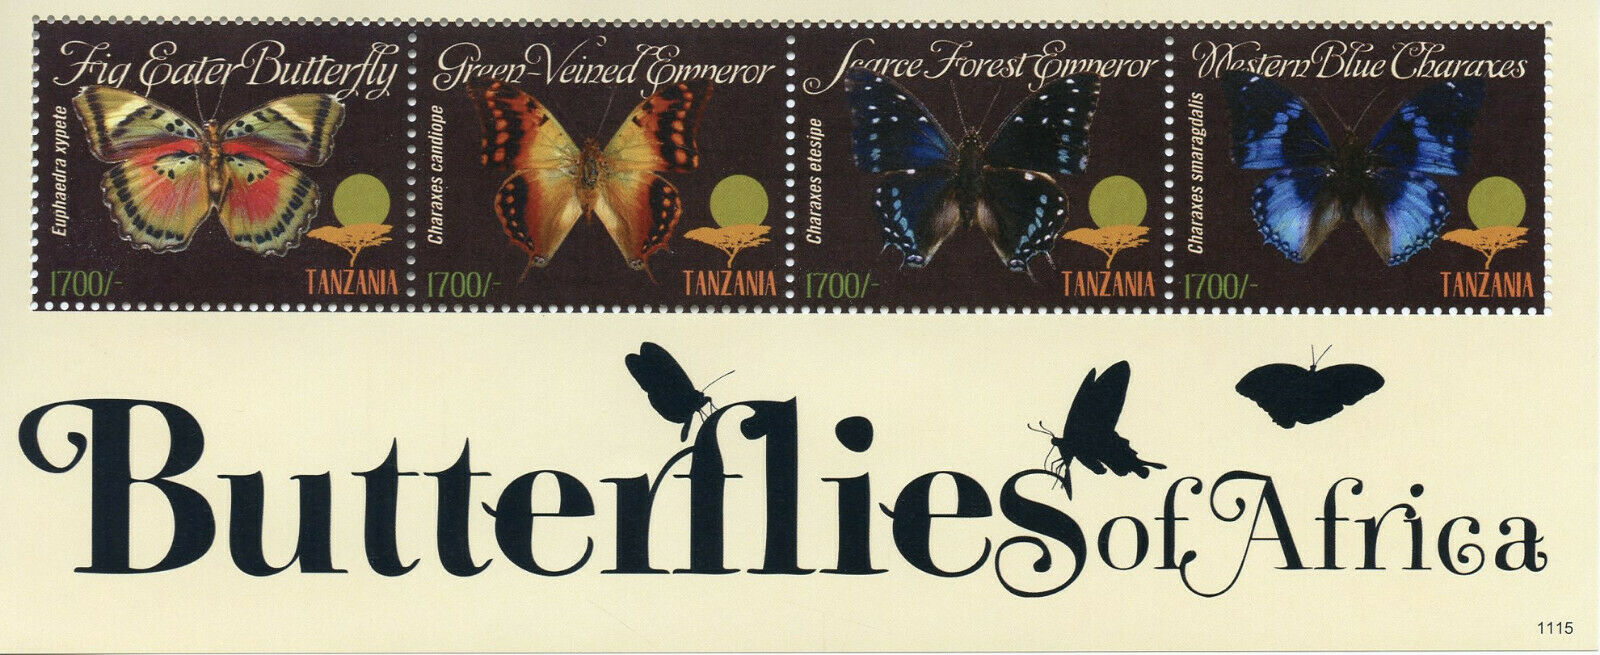 Tanzania Butterfly Stamps 2011 MNH Butterflies of Africa Charaxes 4v M/S II